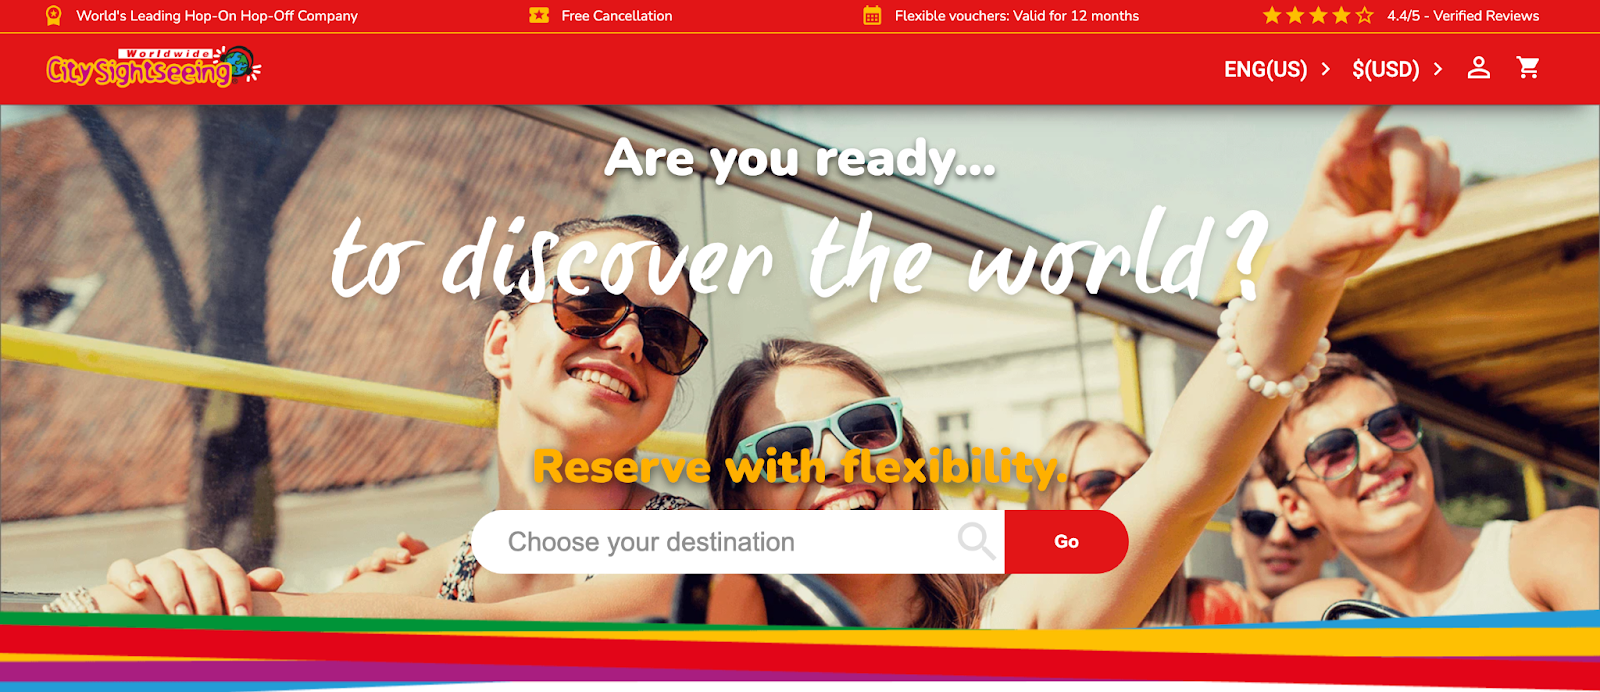 City Sightseeing affiliate program page